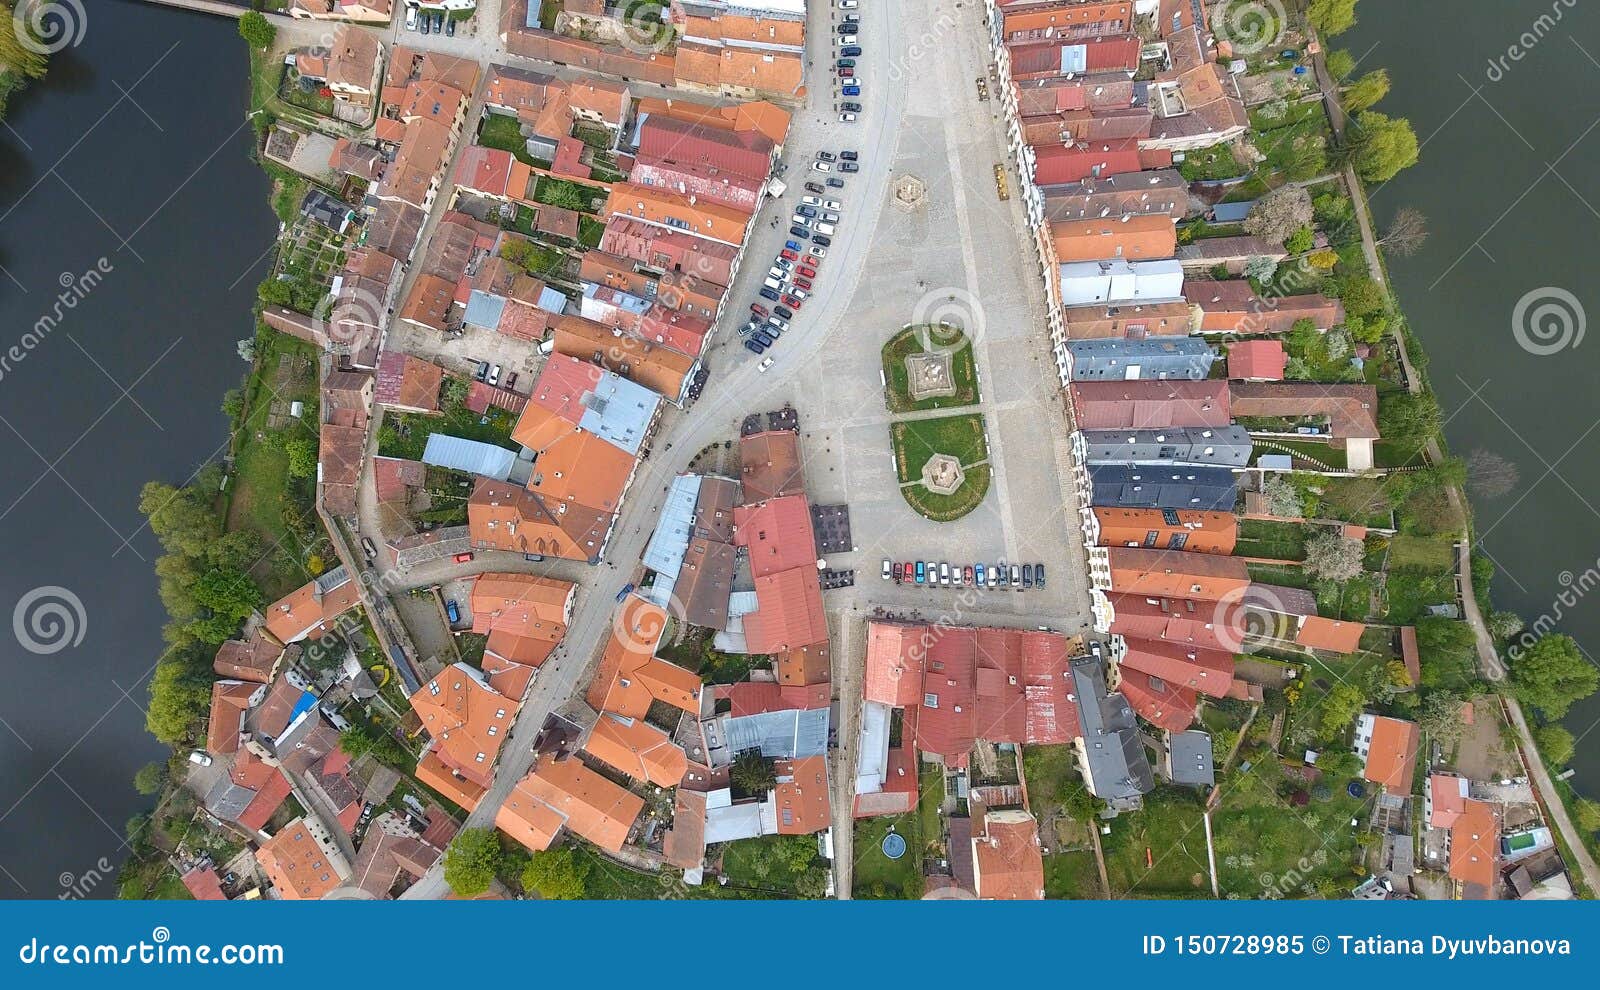 Aerial View Of Buildings With Red Tile Roofs On Medieval Square And Old